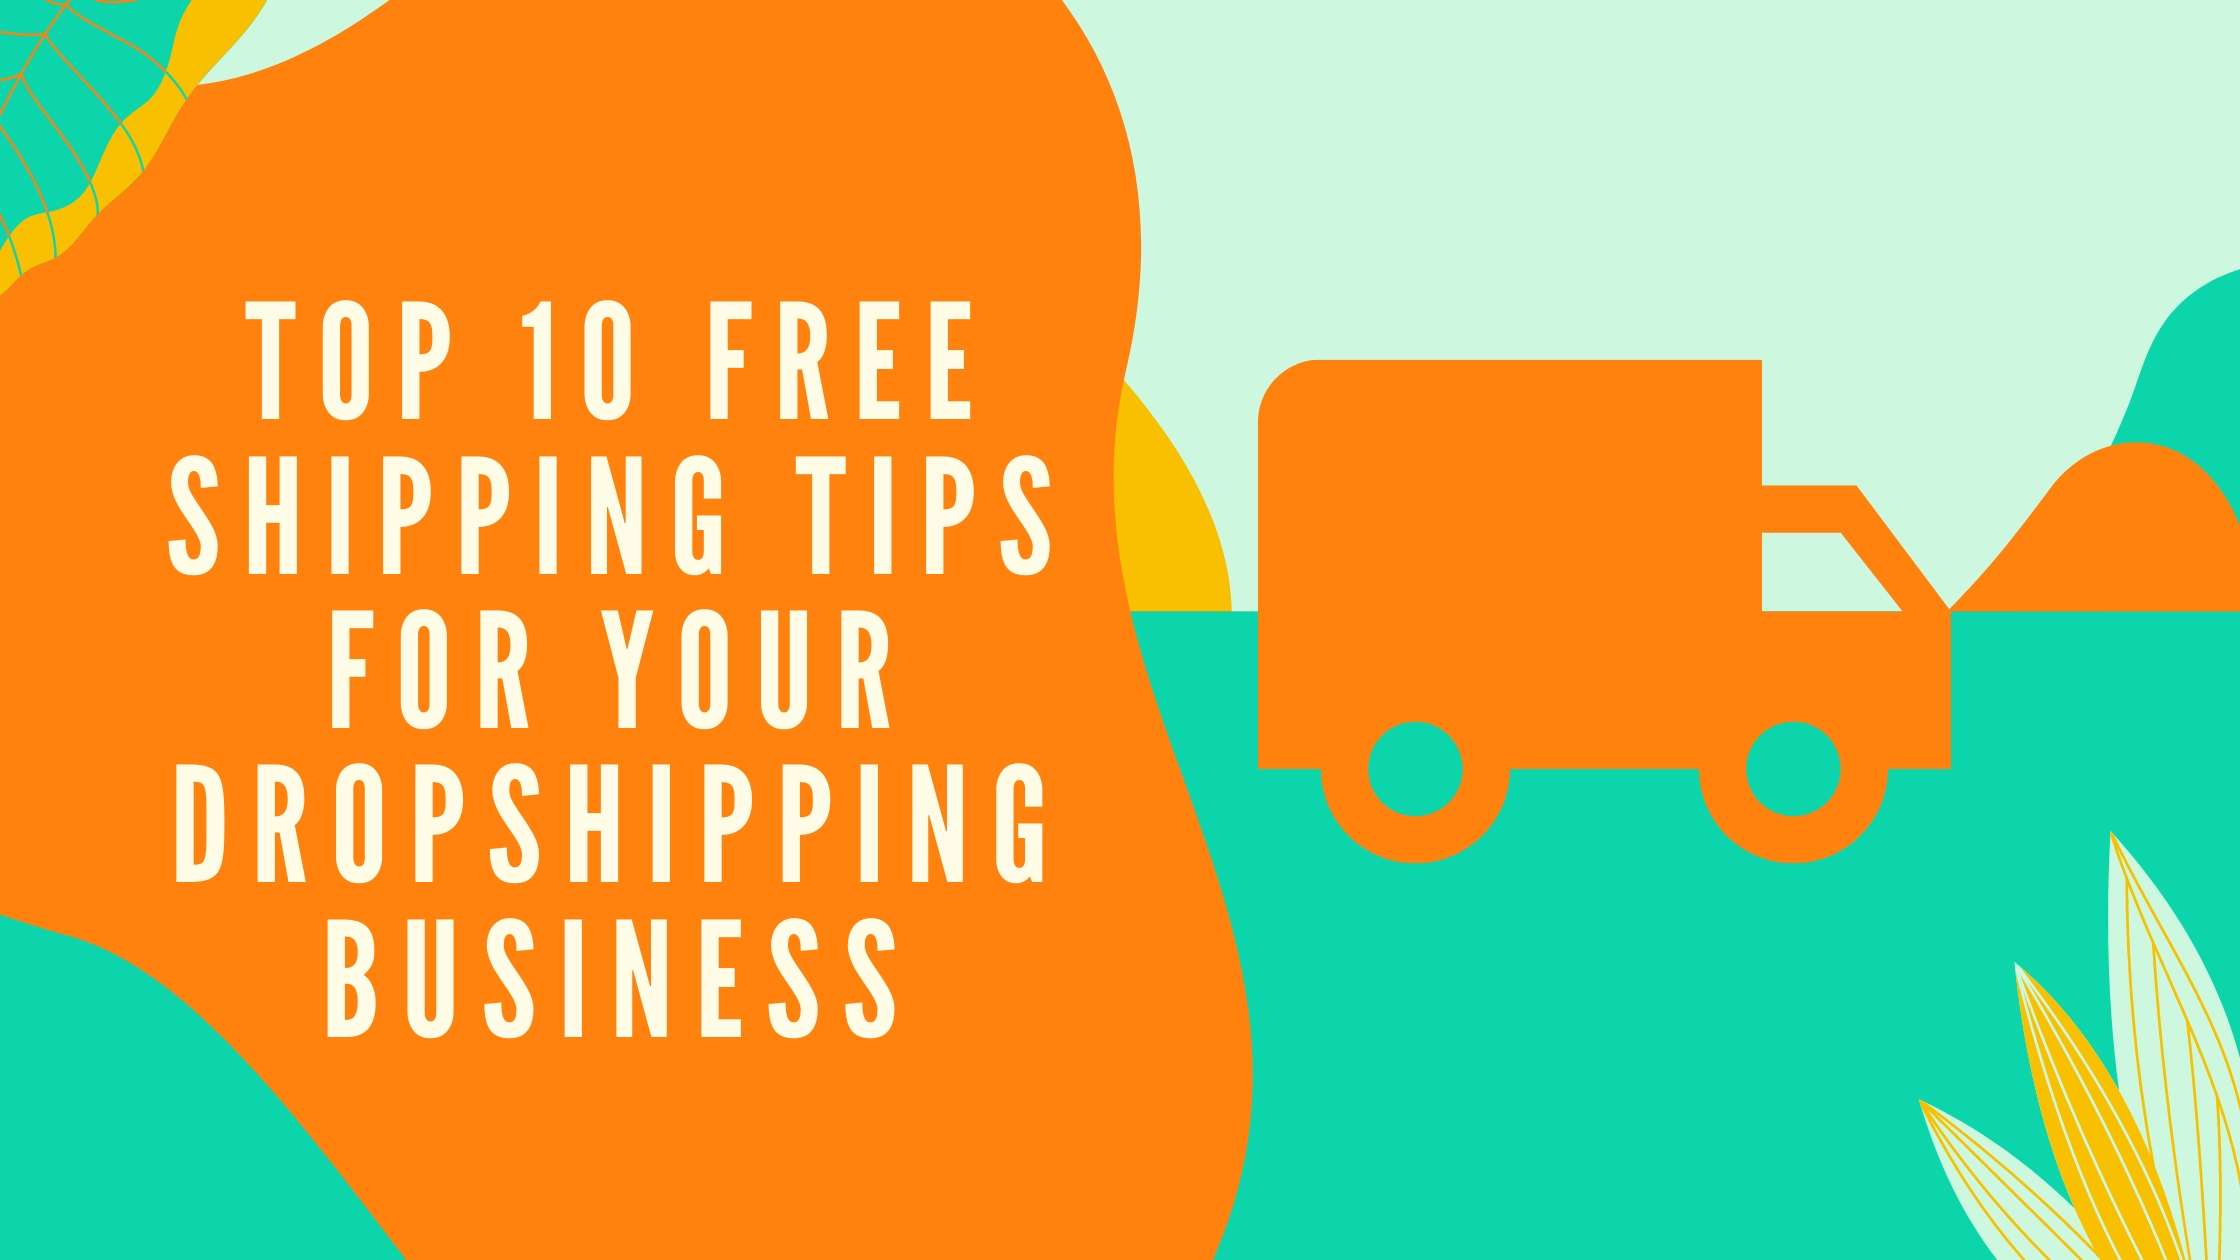 Top 10 Free Shipping Tips to Boost Your Dropshipping Business